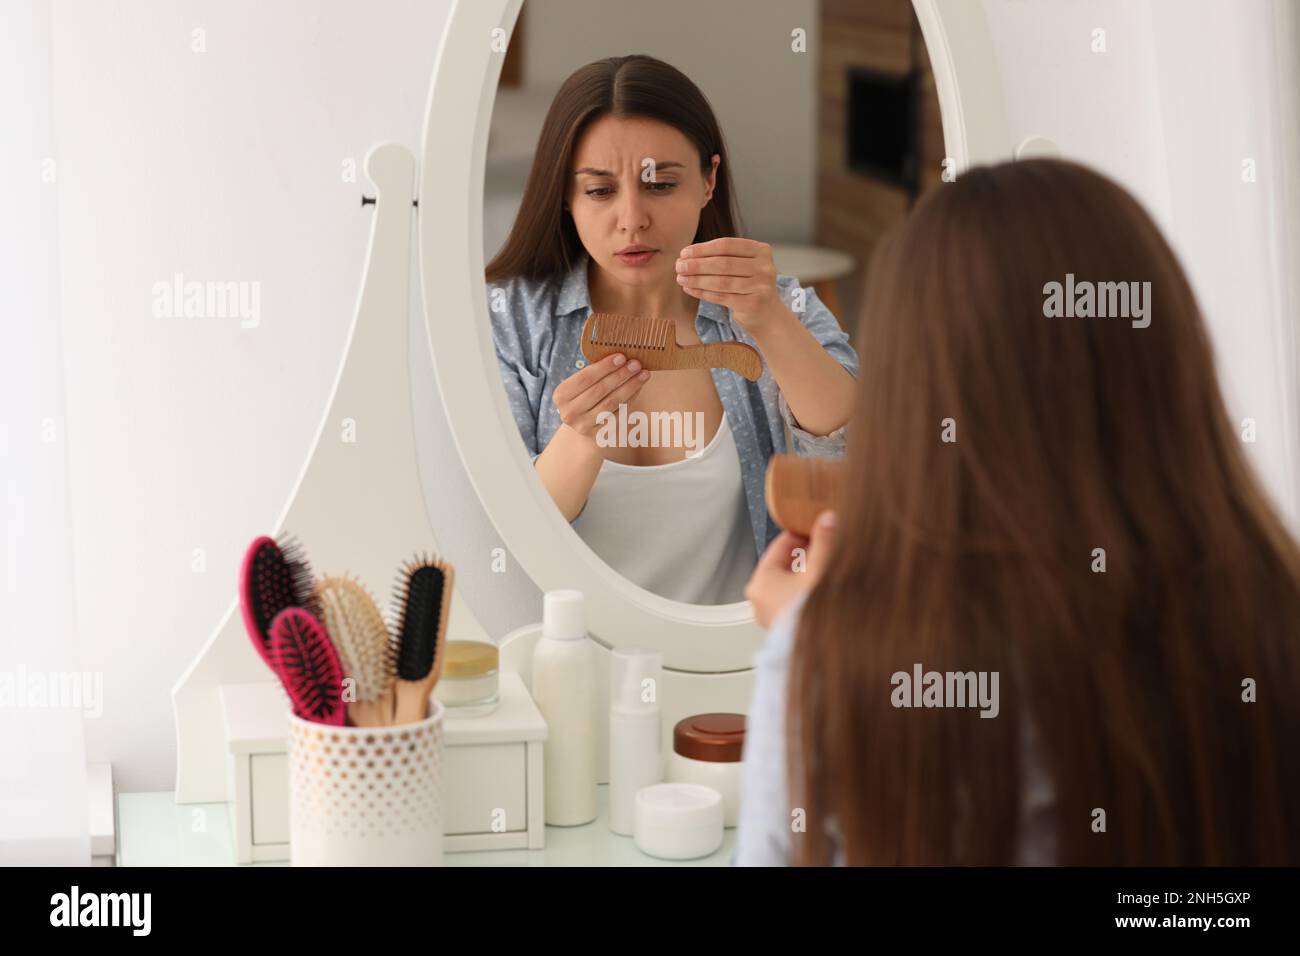 Emotional woman with hair loss problem near mirror indoors Stock Photo